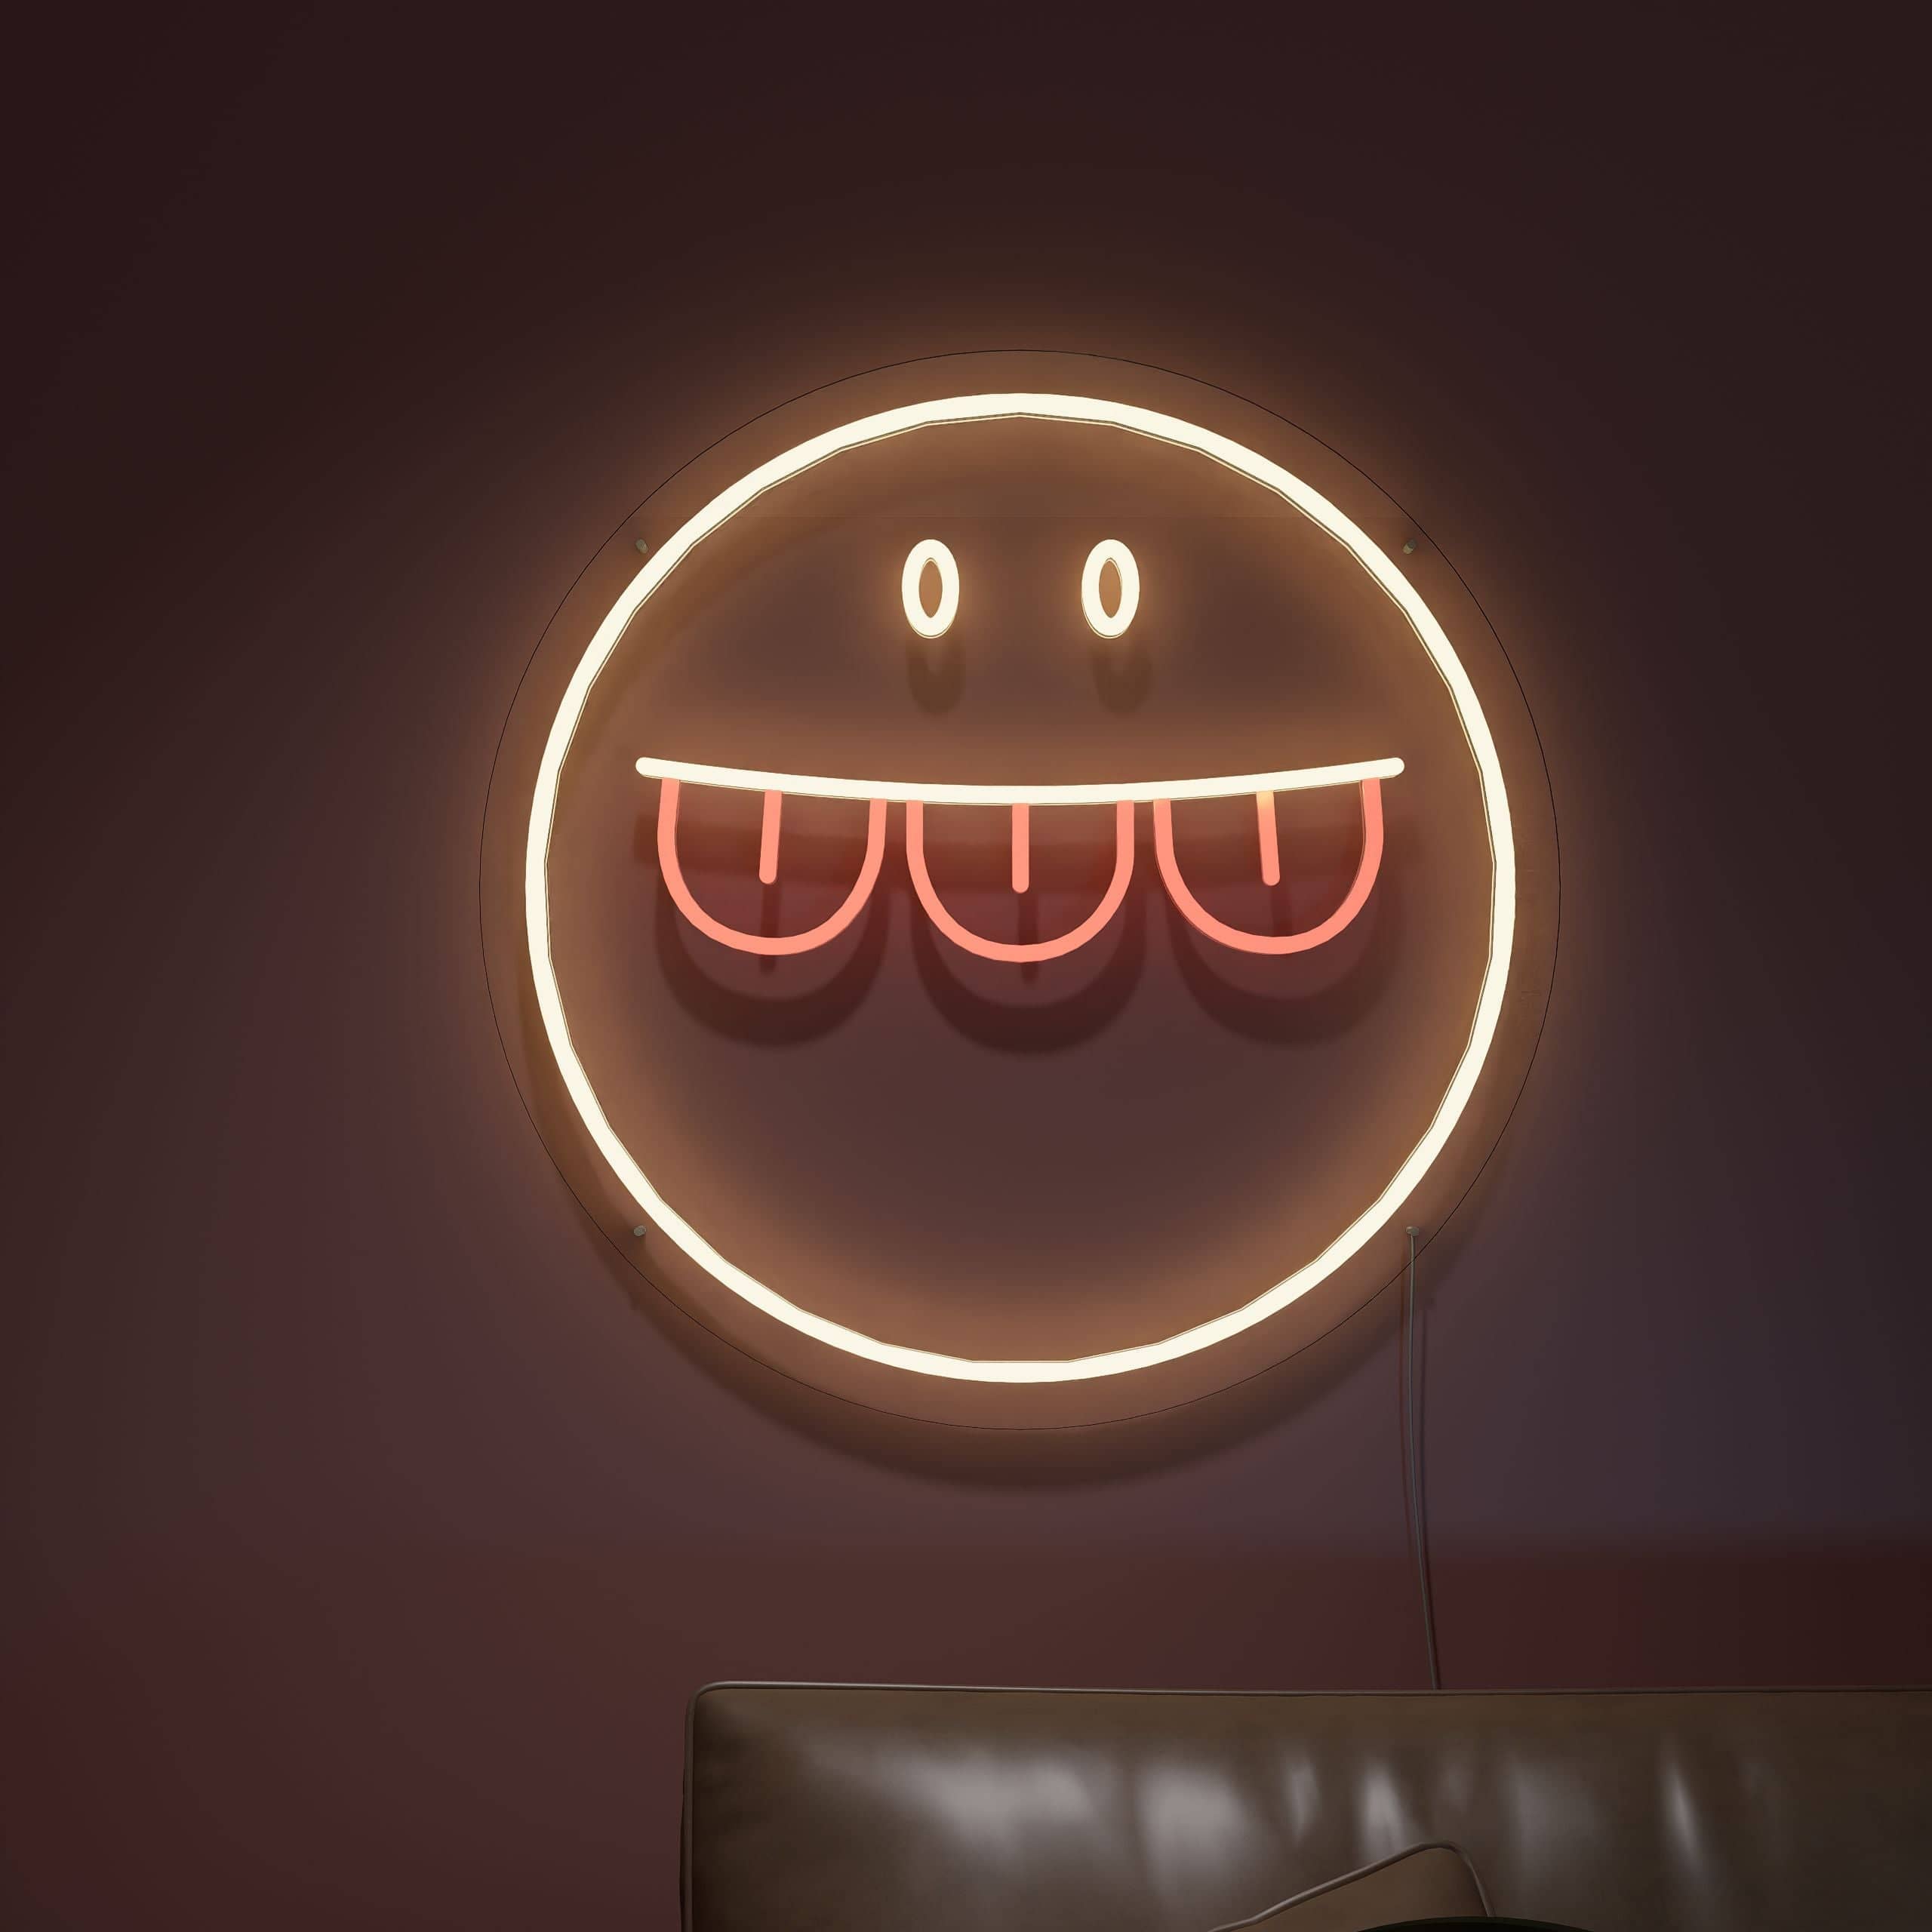 Create a fun atmosphere with neon bar signs at home